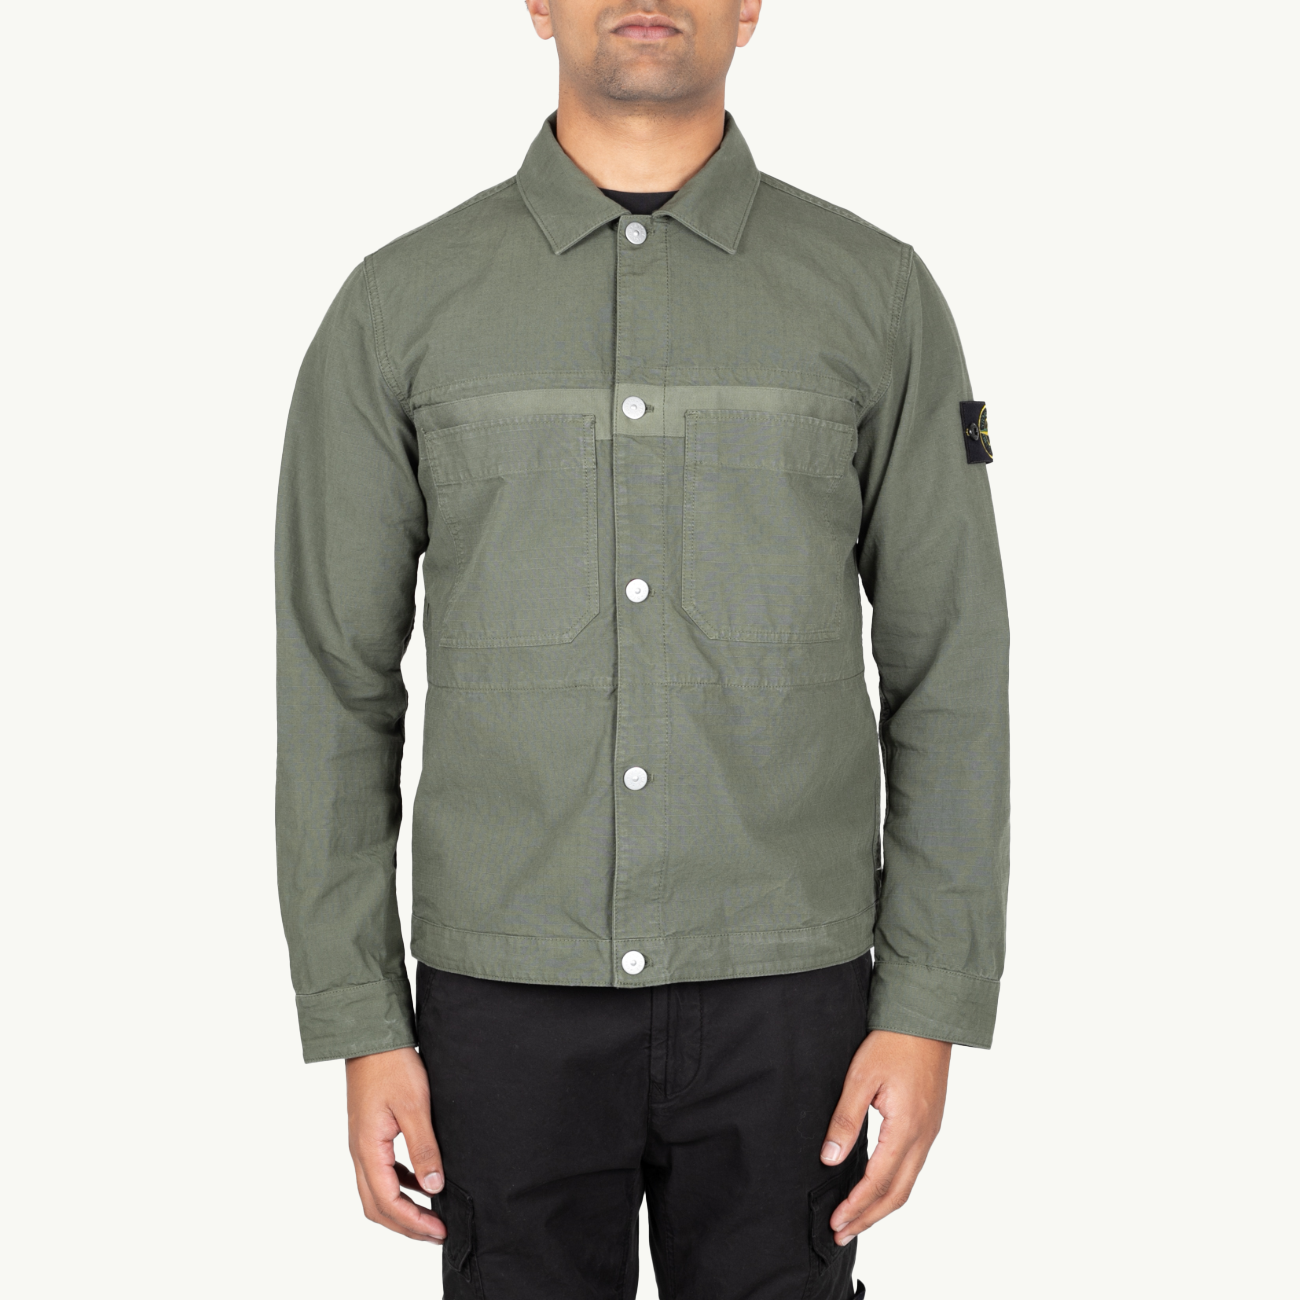 Overshirt Patch Button Up Double Pocket - Musk 5981